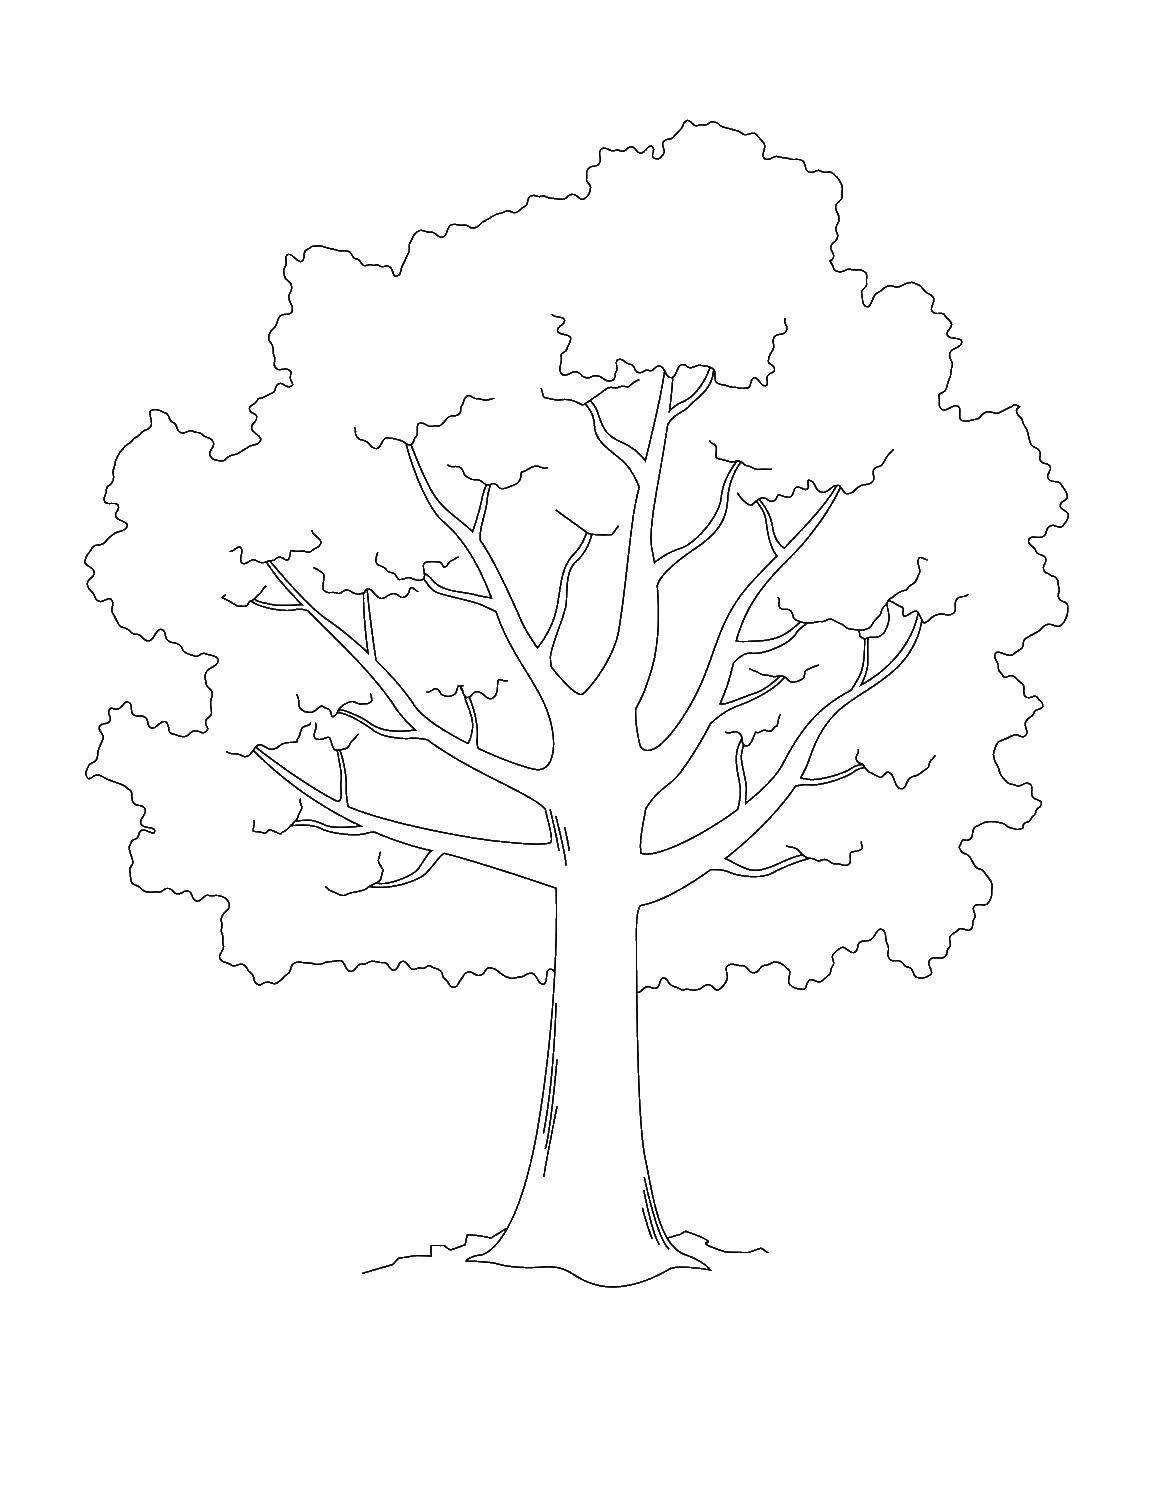 Coloring Old tree. Category The contour of the tree. Tags:  The contour of the tree.